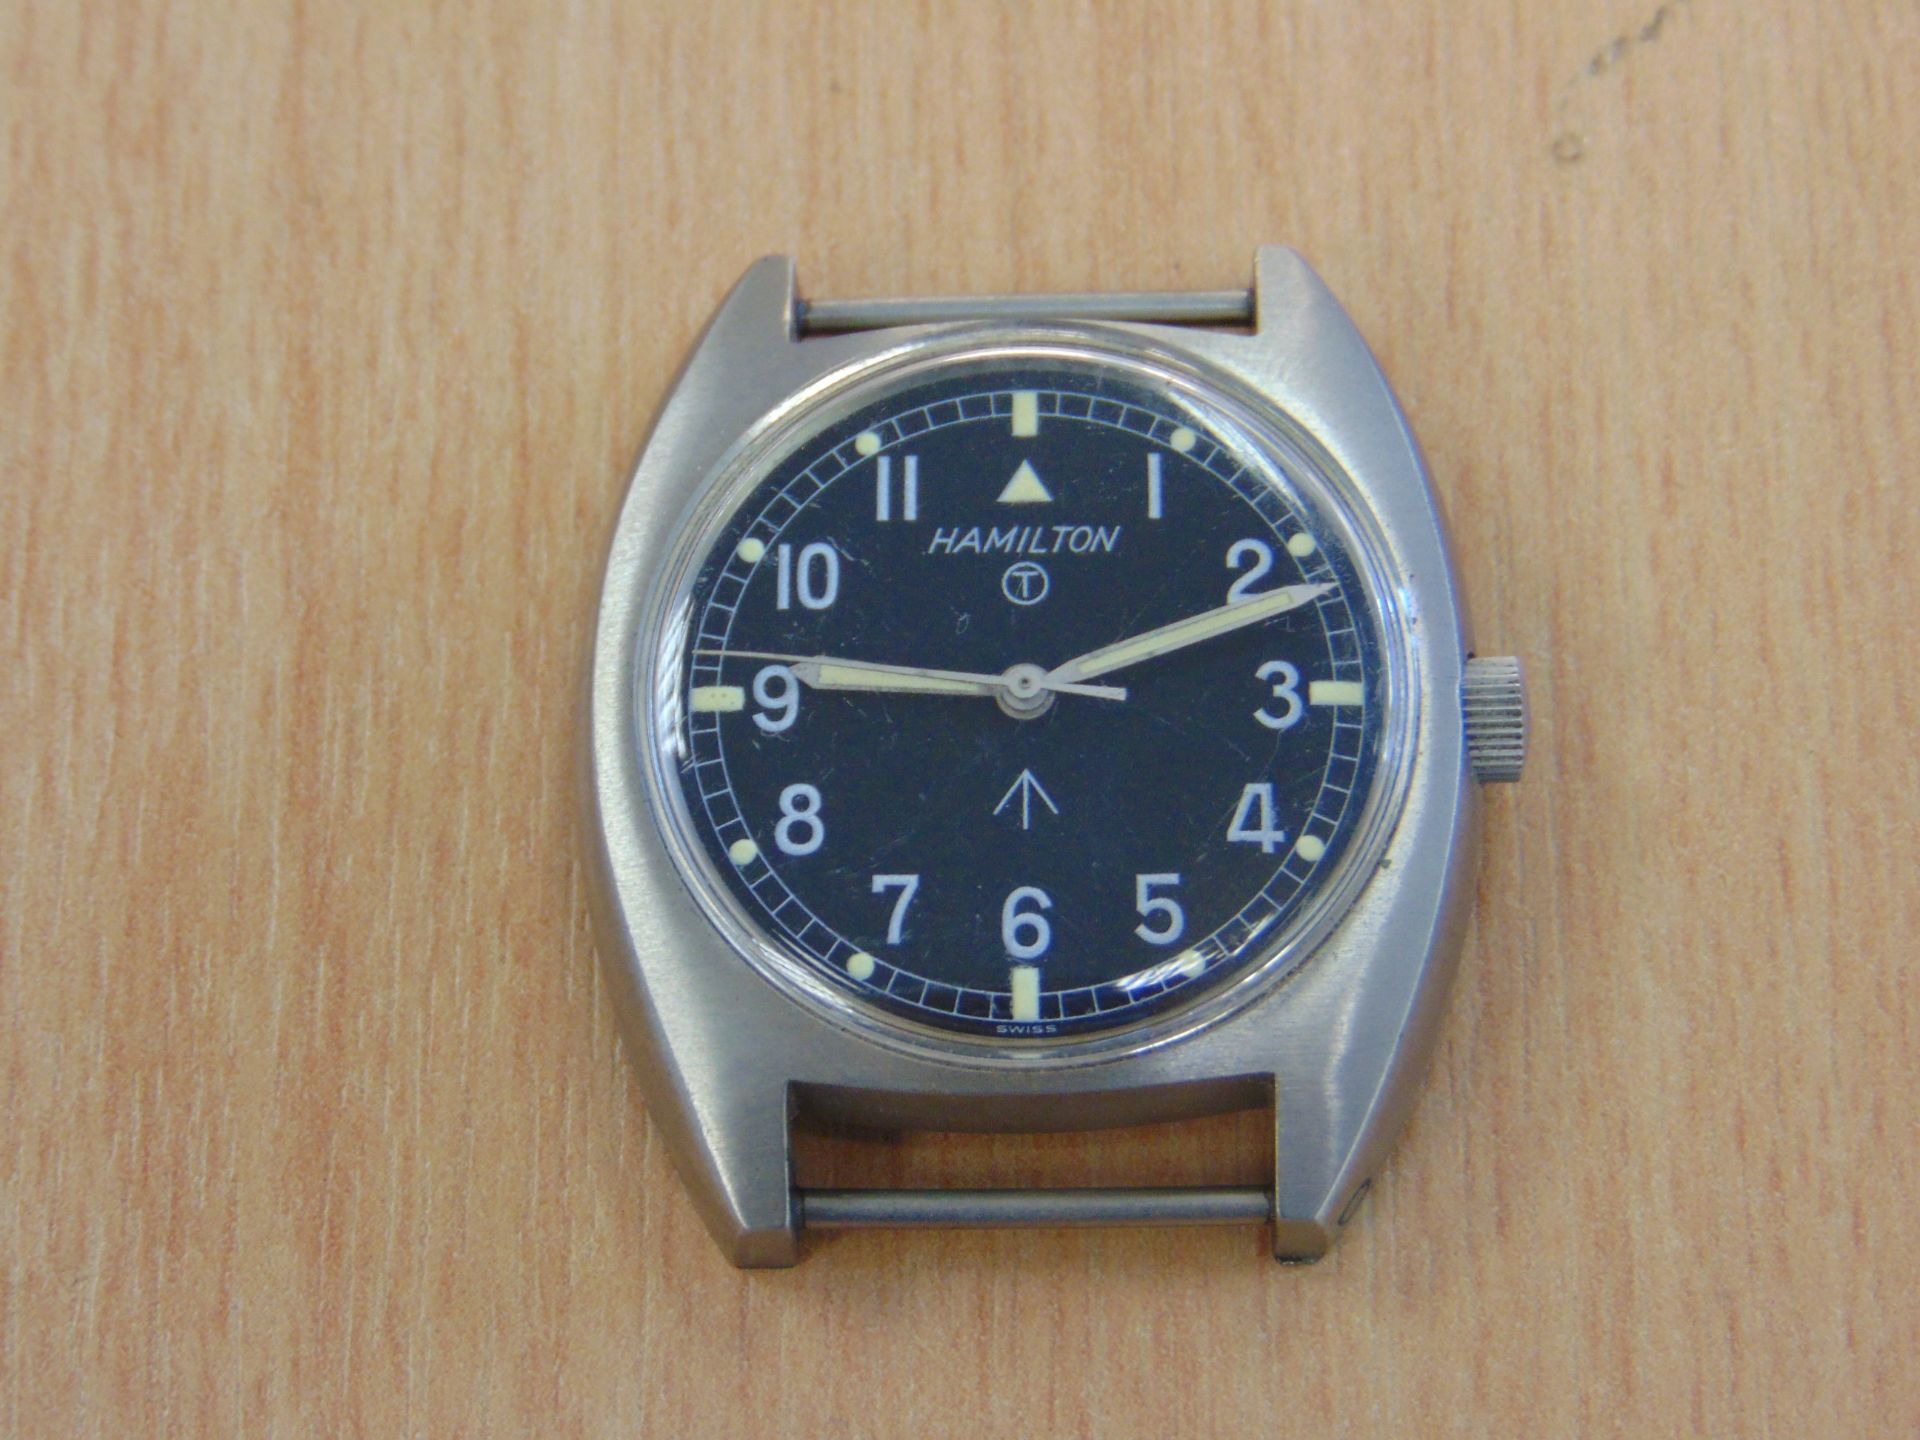 V.V. RARE UNISSUED HAMITON WIND UP W10 SERVICE WATCH NATO MARKINGS DATED 1973 - Image 3 of 8